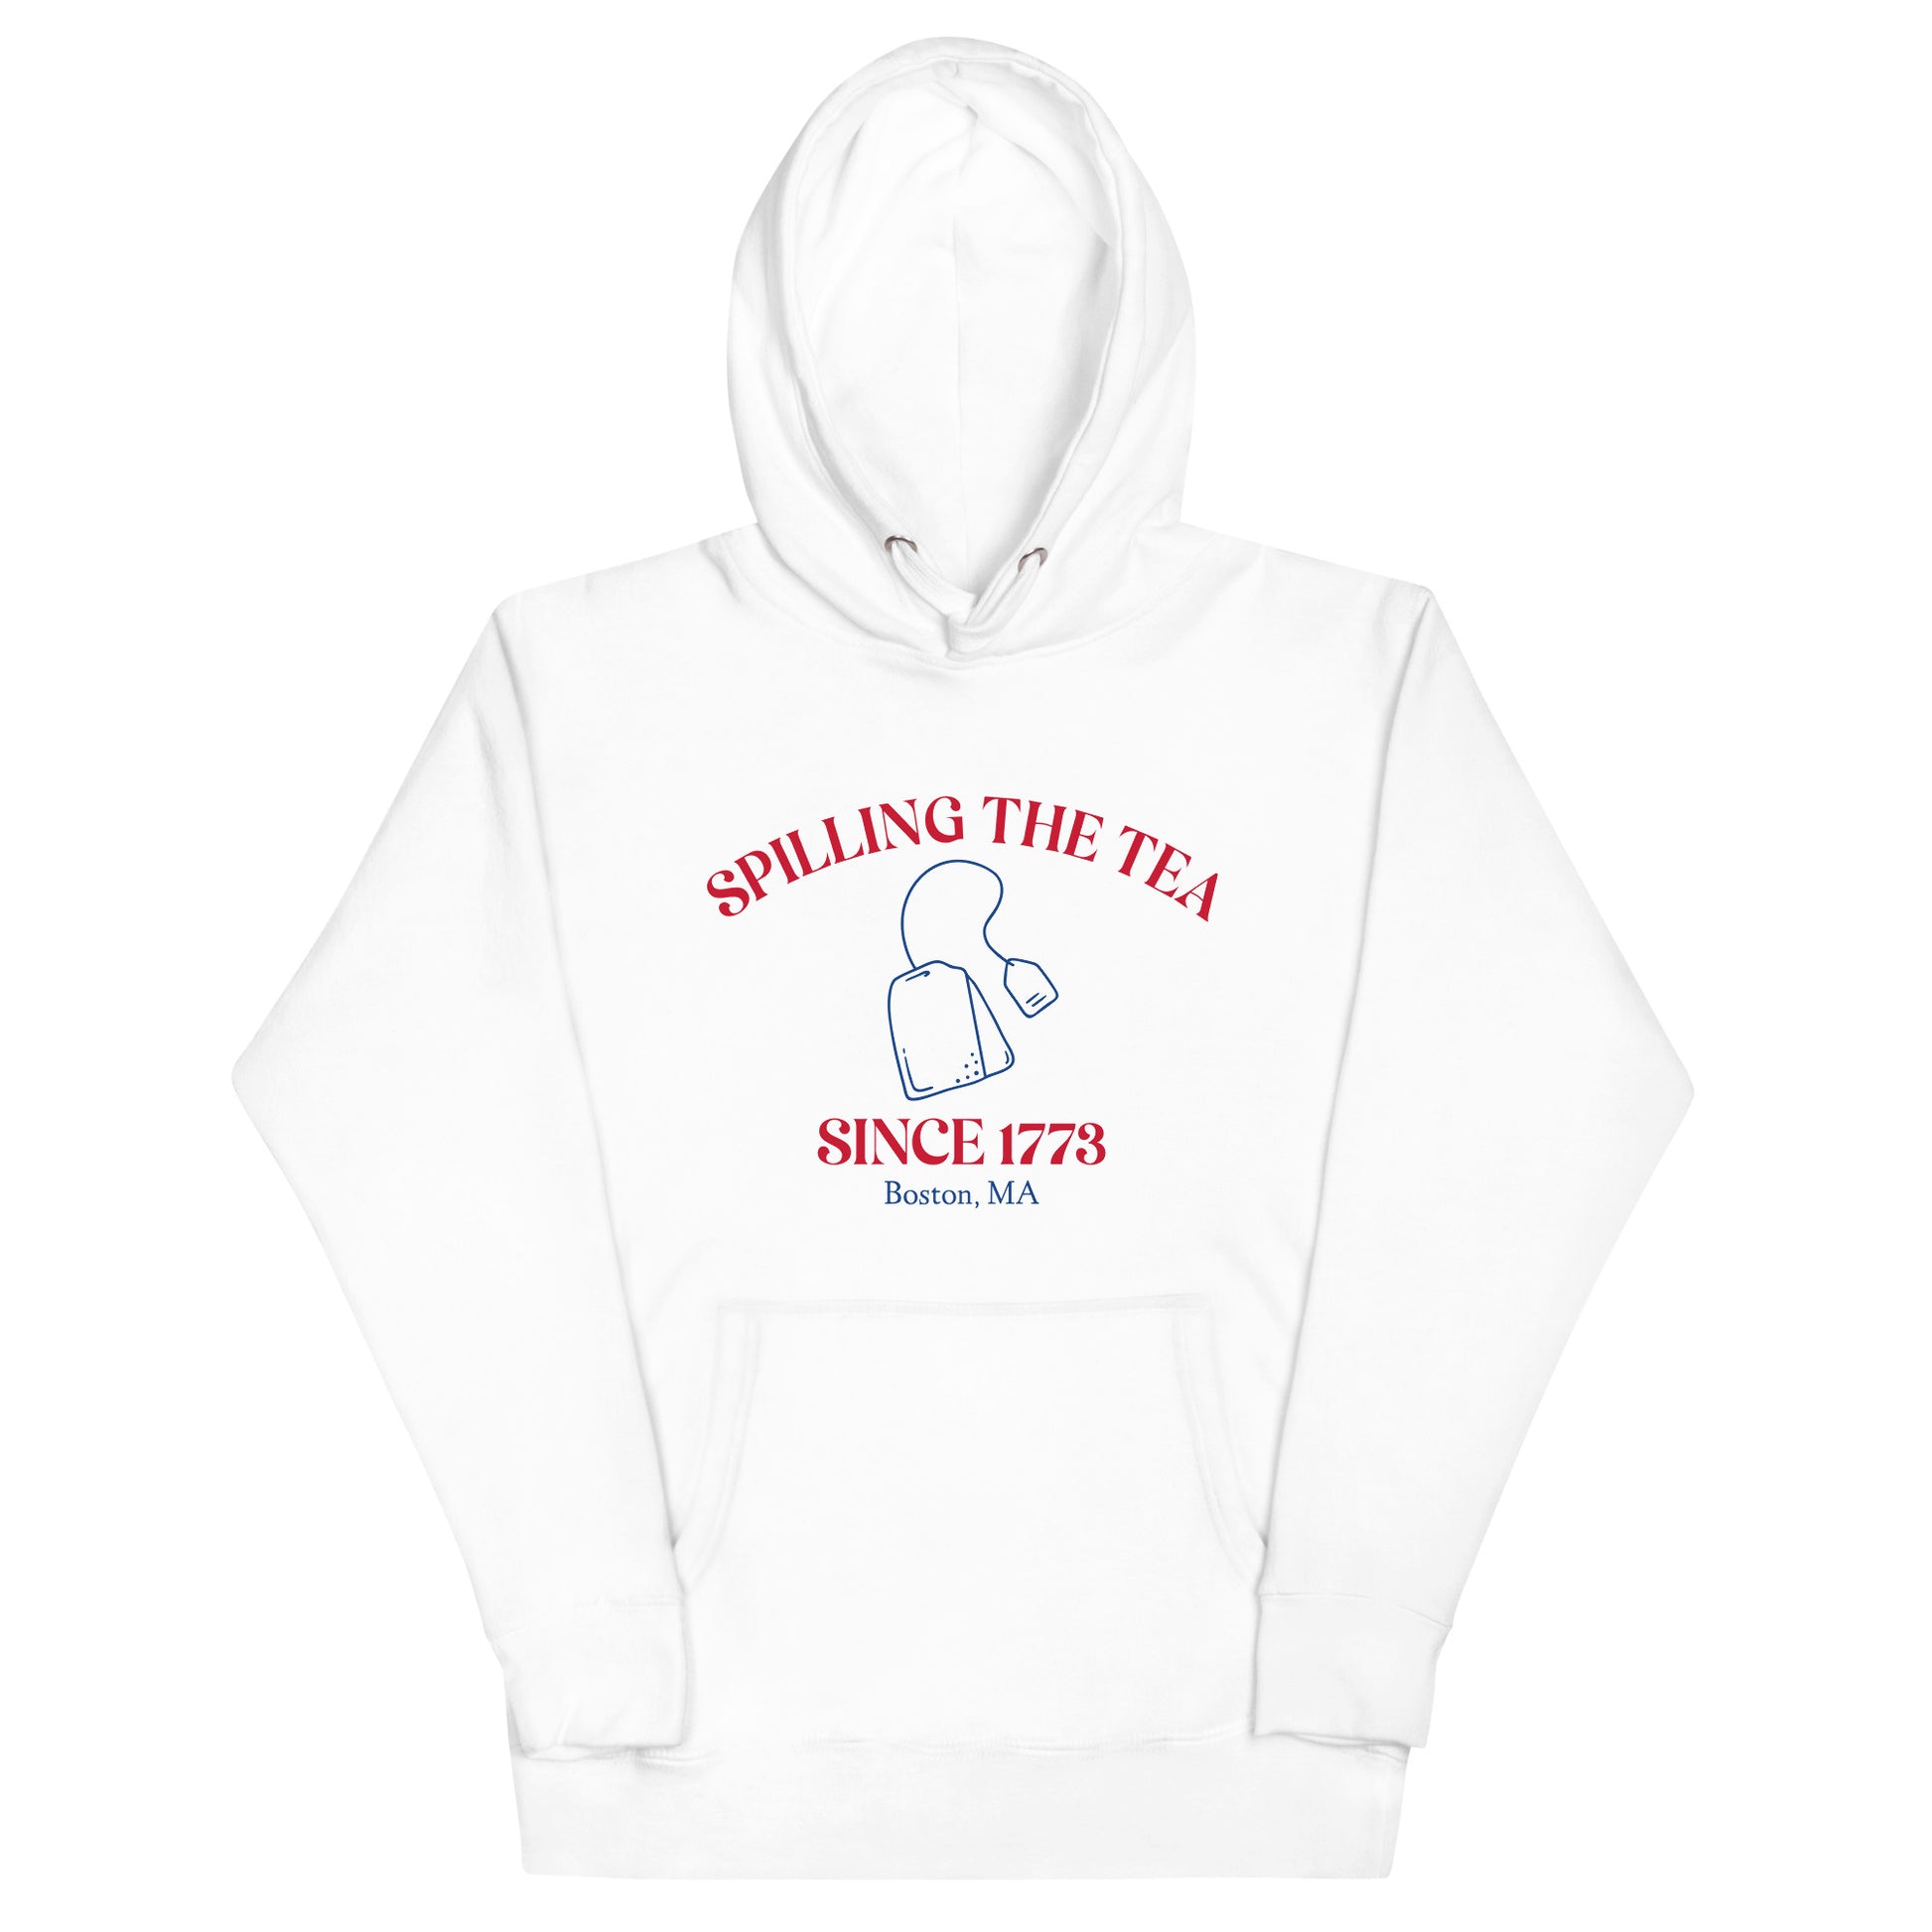 white hoodie that say "spilling the tea since 1773" in red lettering and "Boston MA" in blue lettering with tea bag graphic in middle 